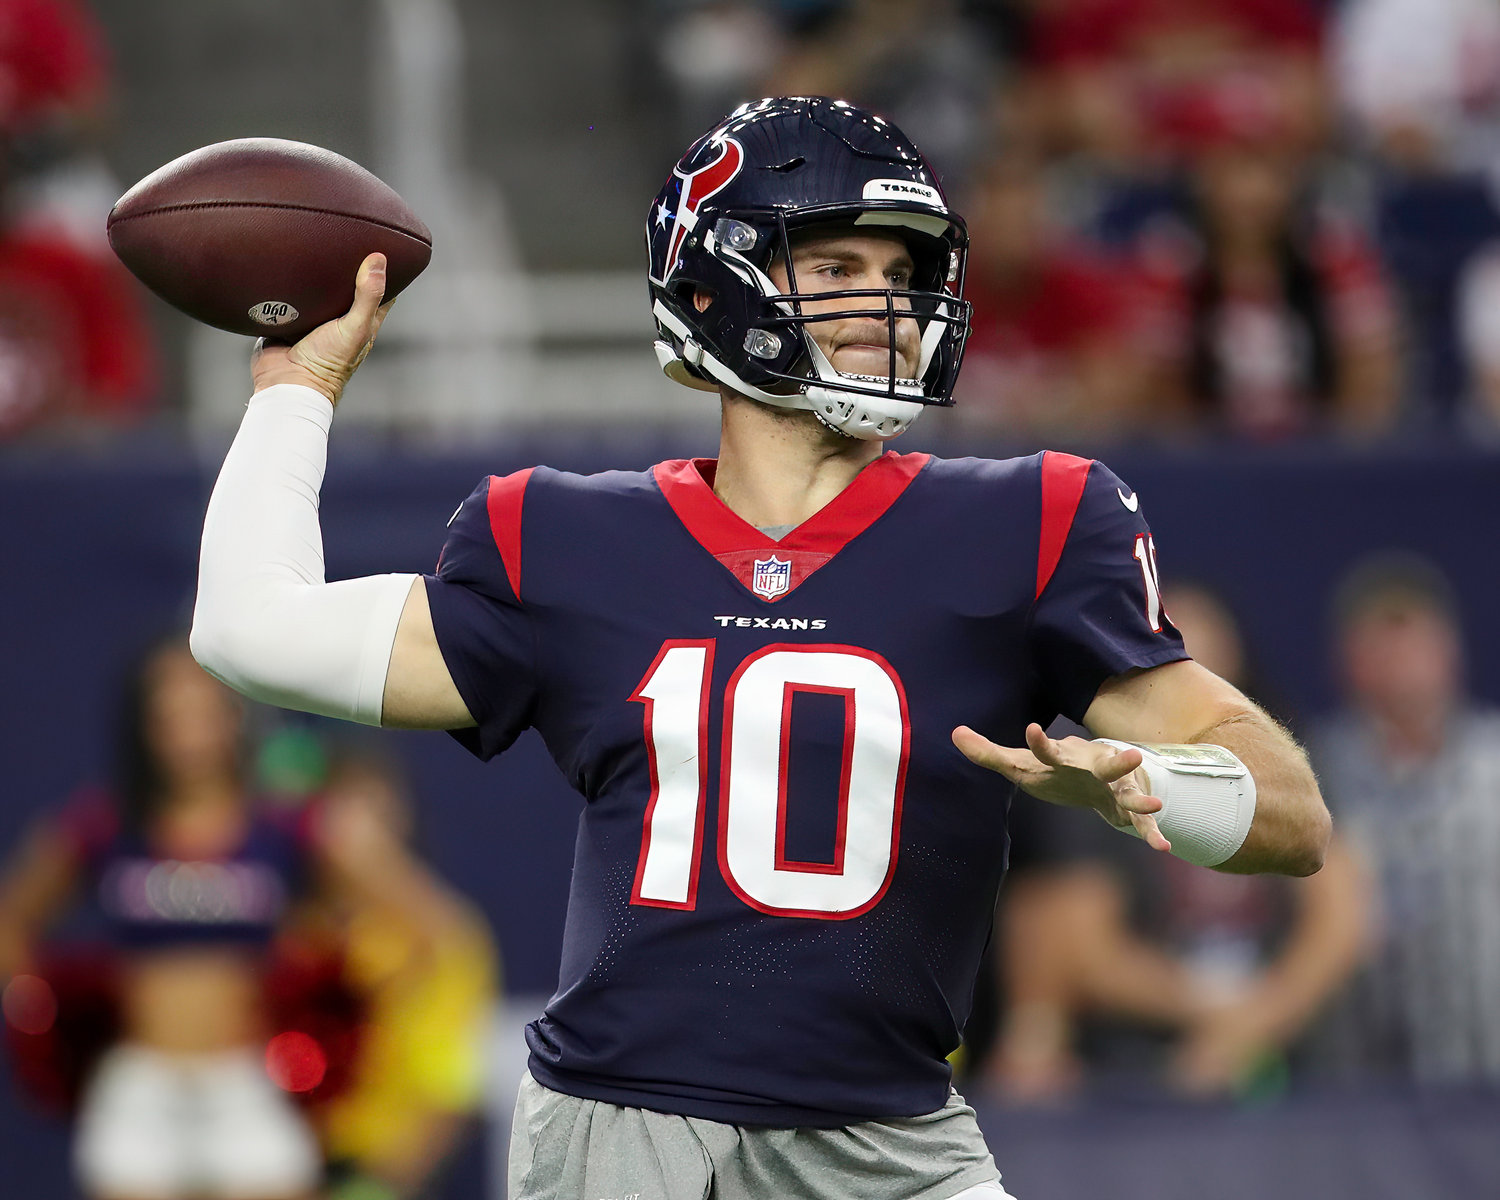 Houston Texans quarterback Davis Mills (10) passes the ball during an NFL preseason game between the Texans and the 49ers in Houston, Texas, on August 25, 2022.